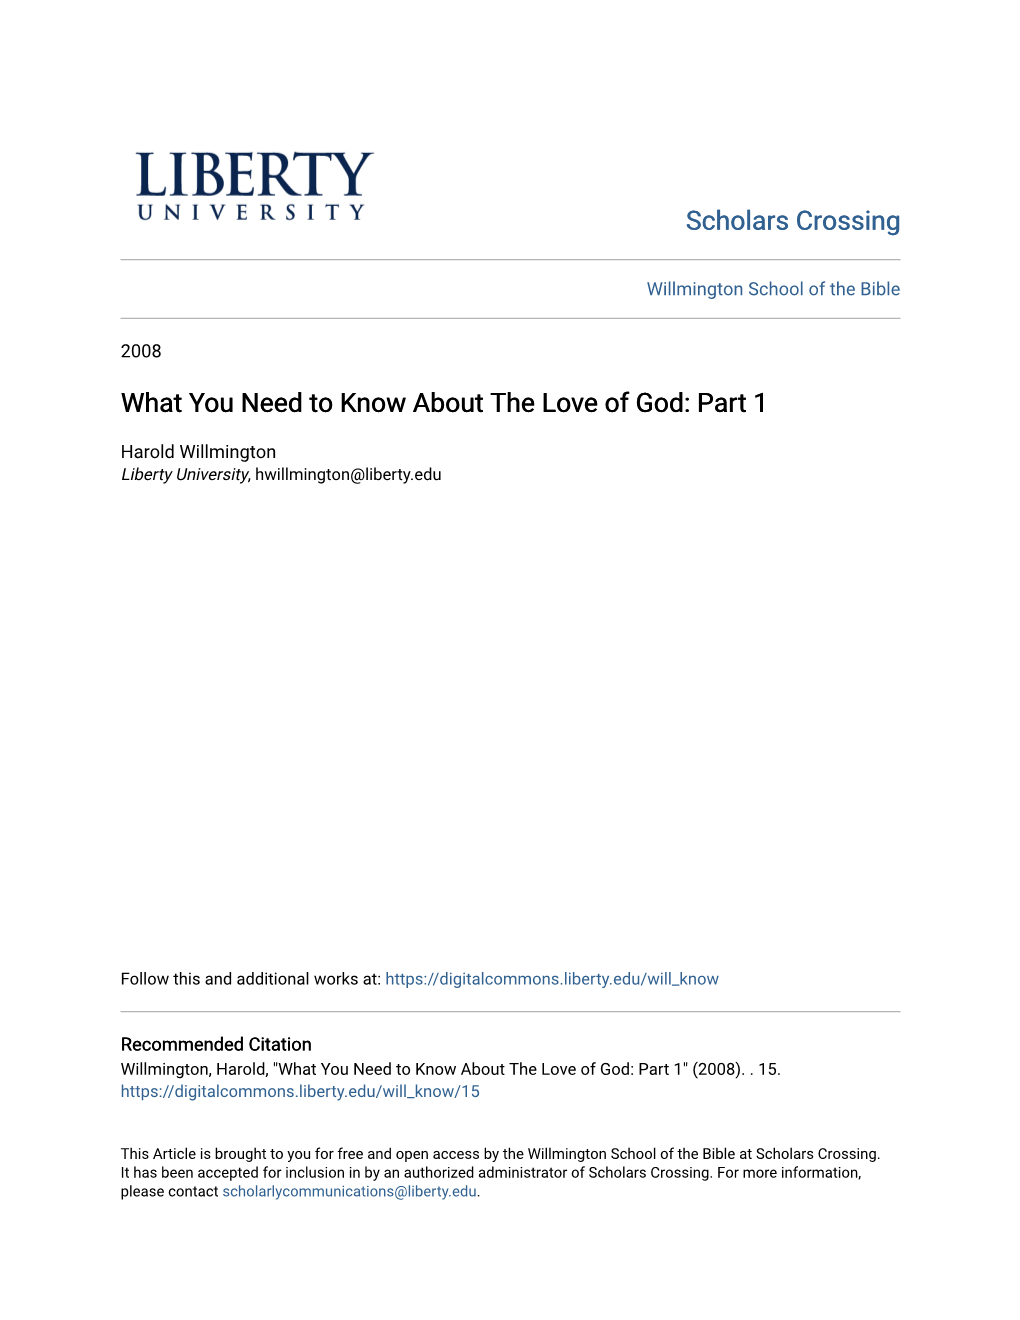 What You Need to Know About the Love of God: Part 1